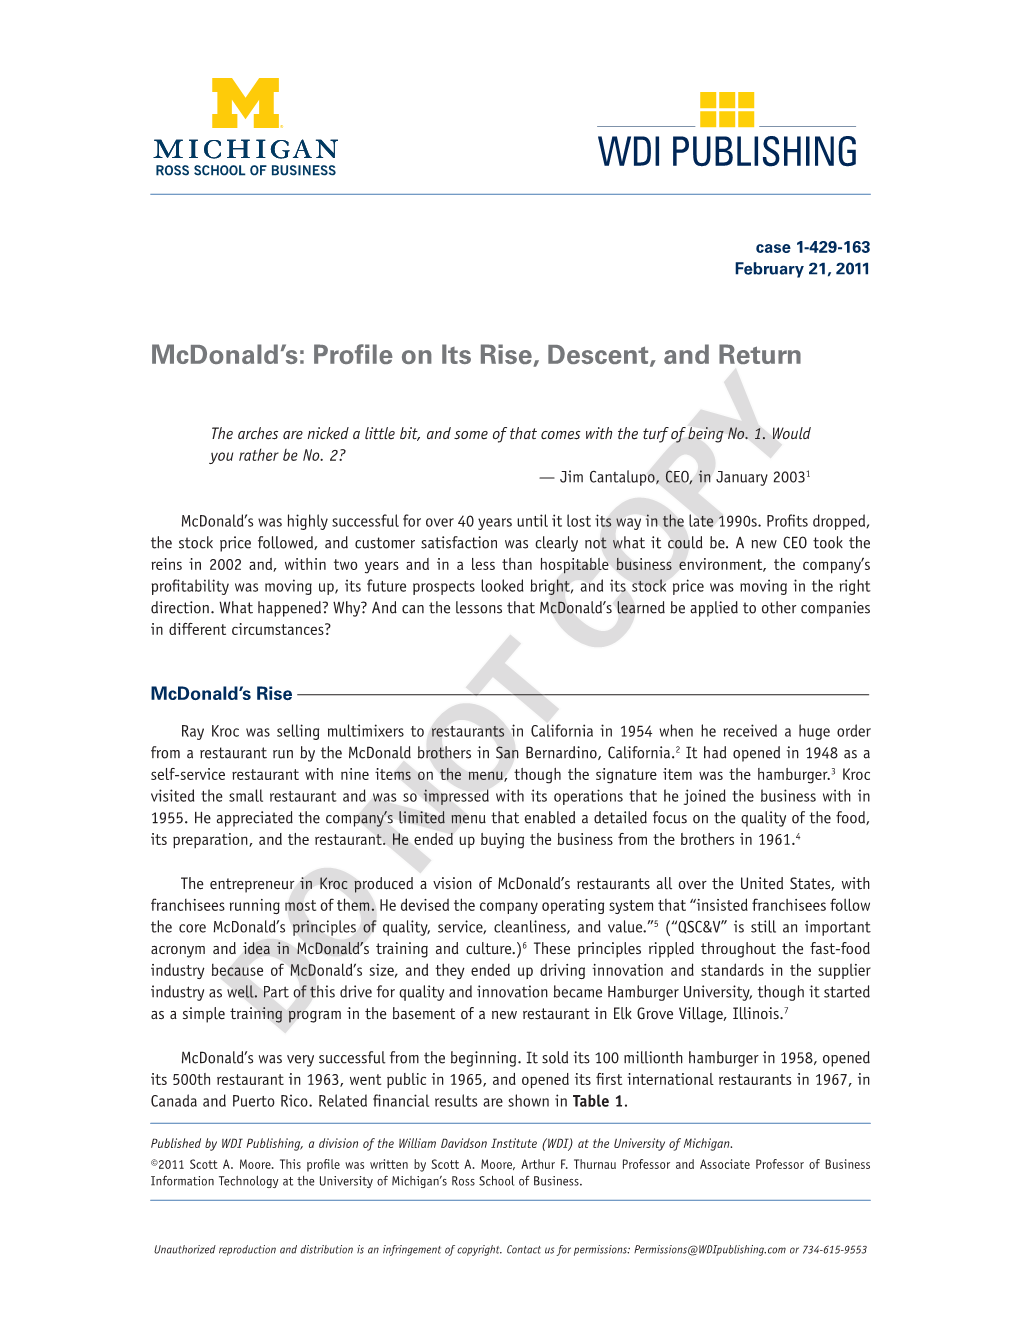 Mcdonald's: Profile on Its Rise, Descent, and Return